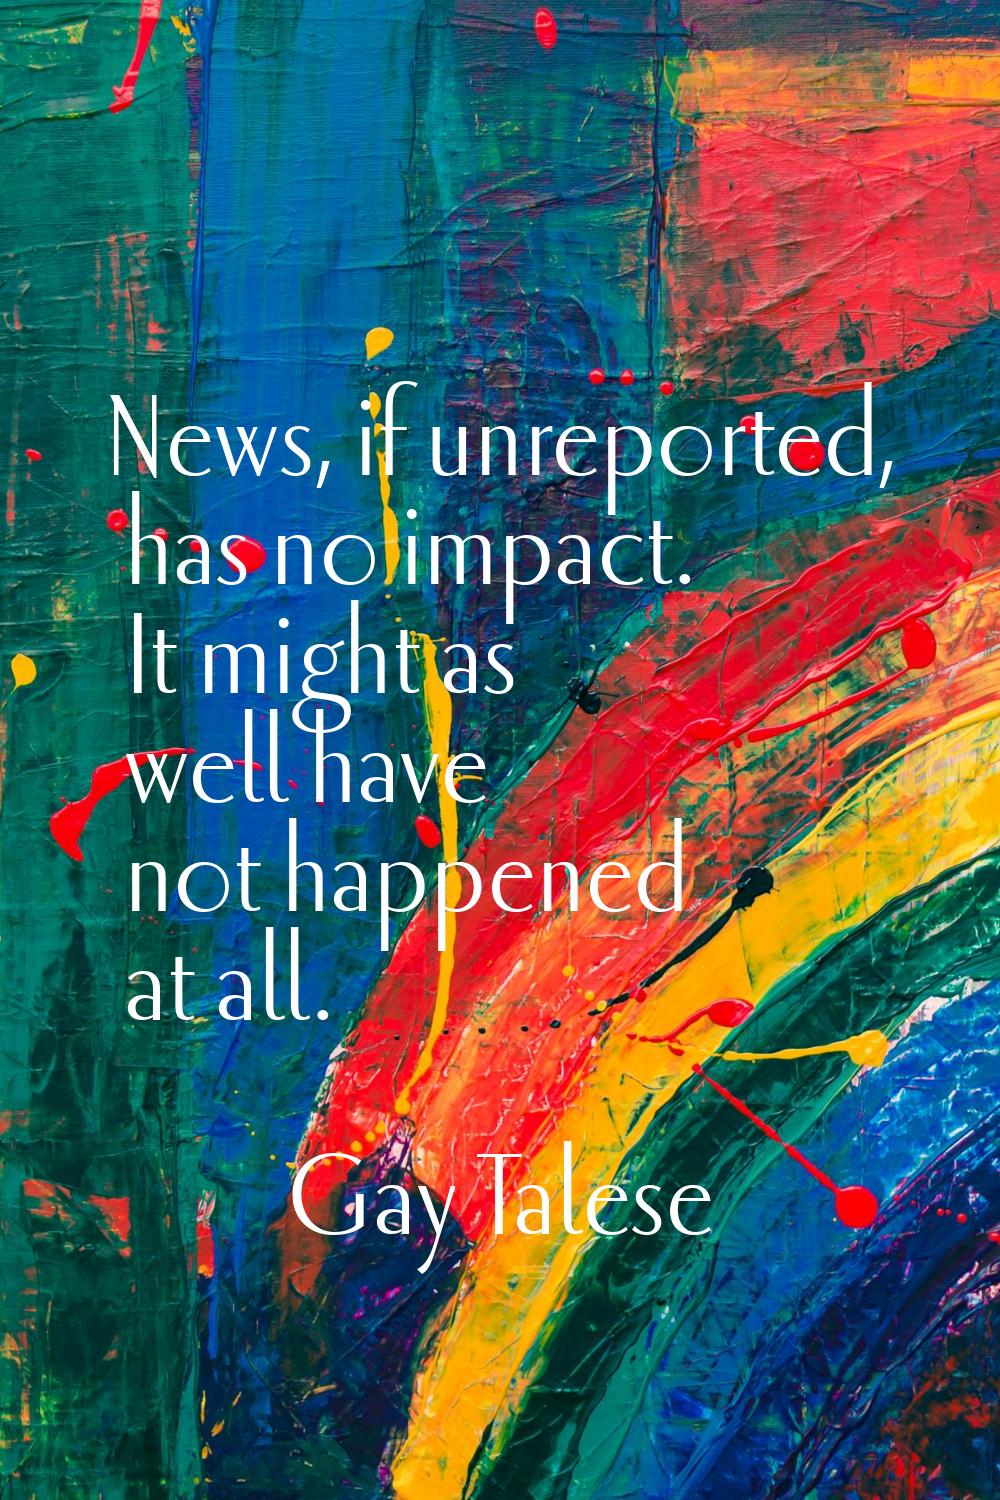 News, if unreported, has no impact. It might as well have not happened at all.